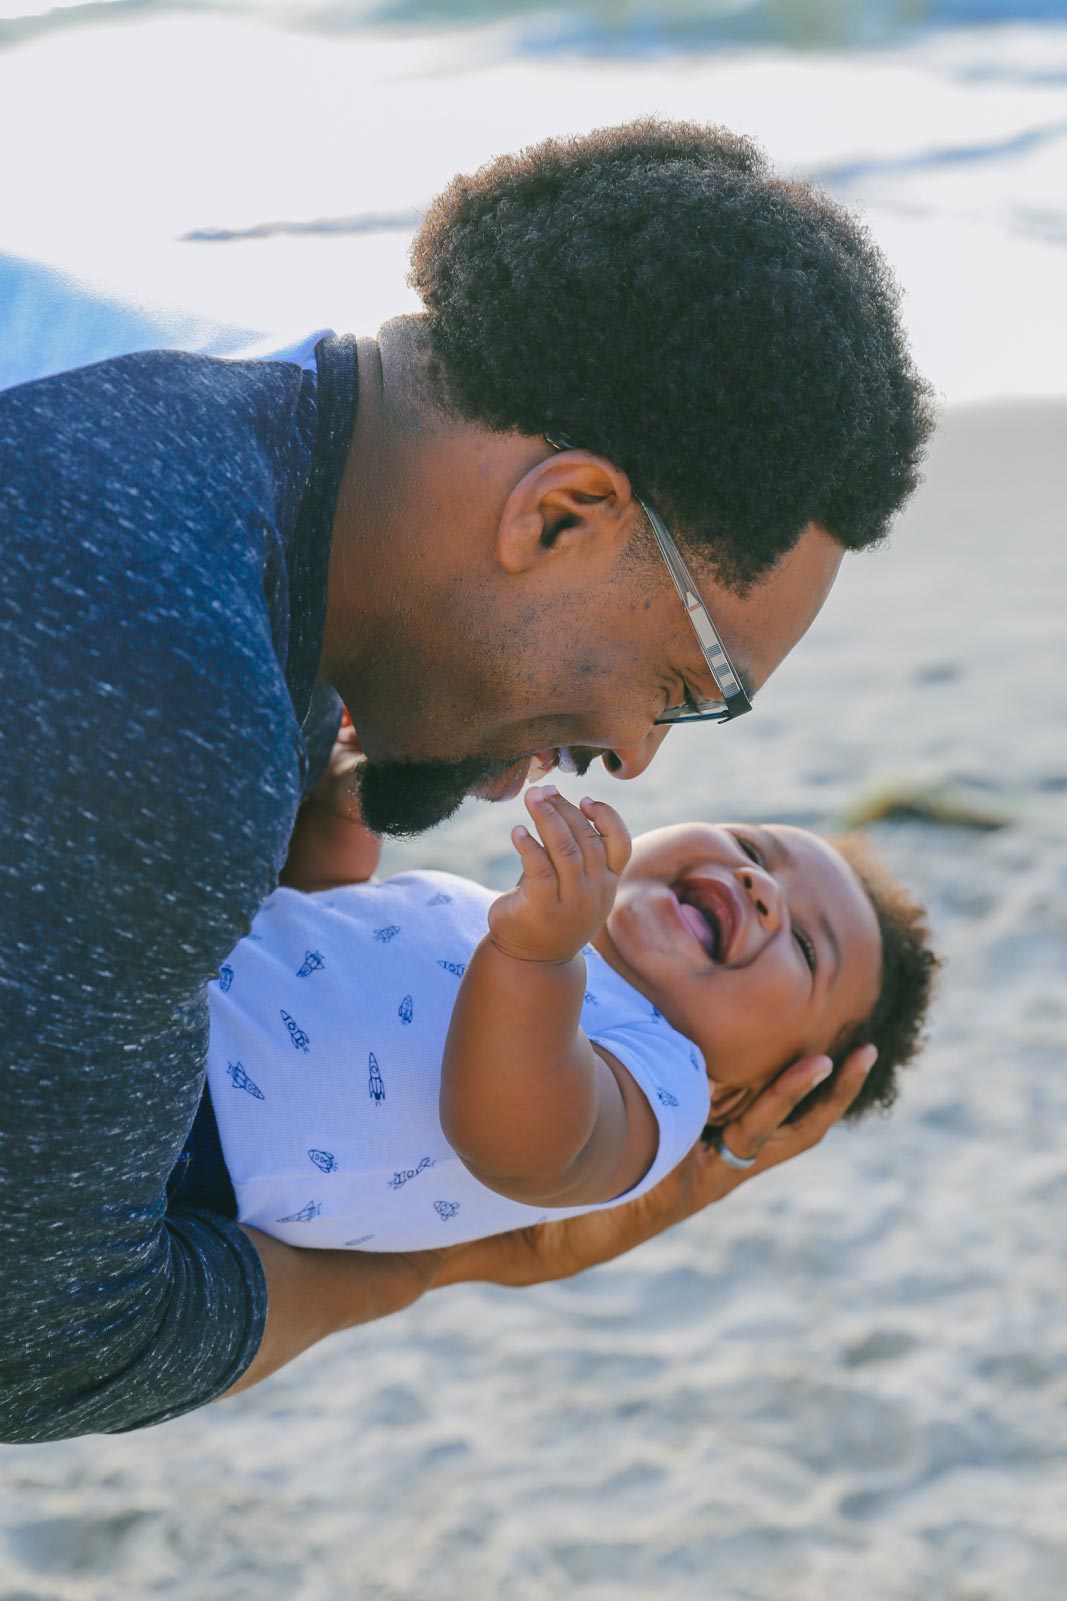 A smiling man in glasses cradling a baby on a beach.